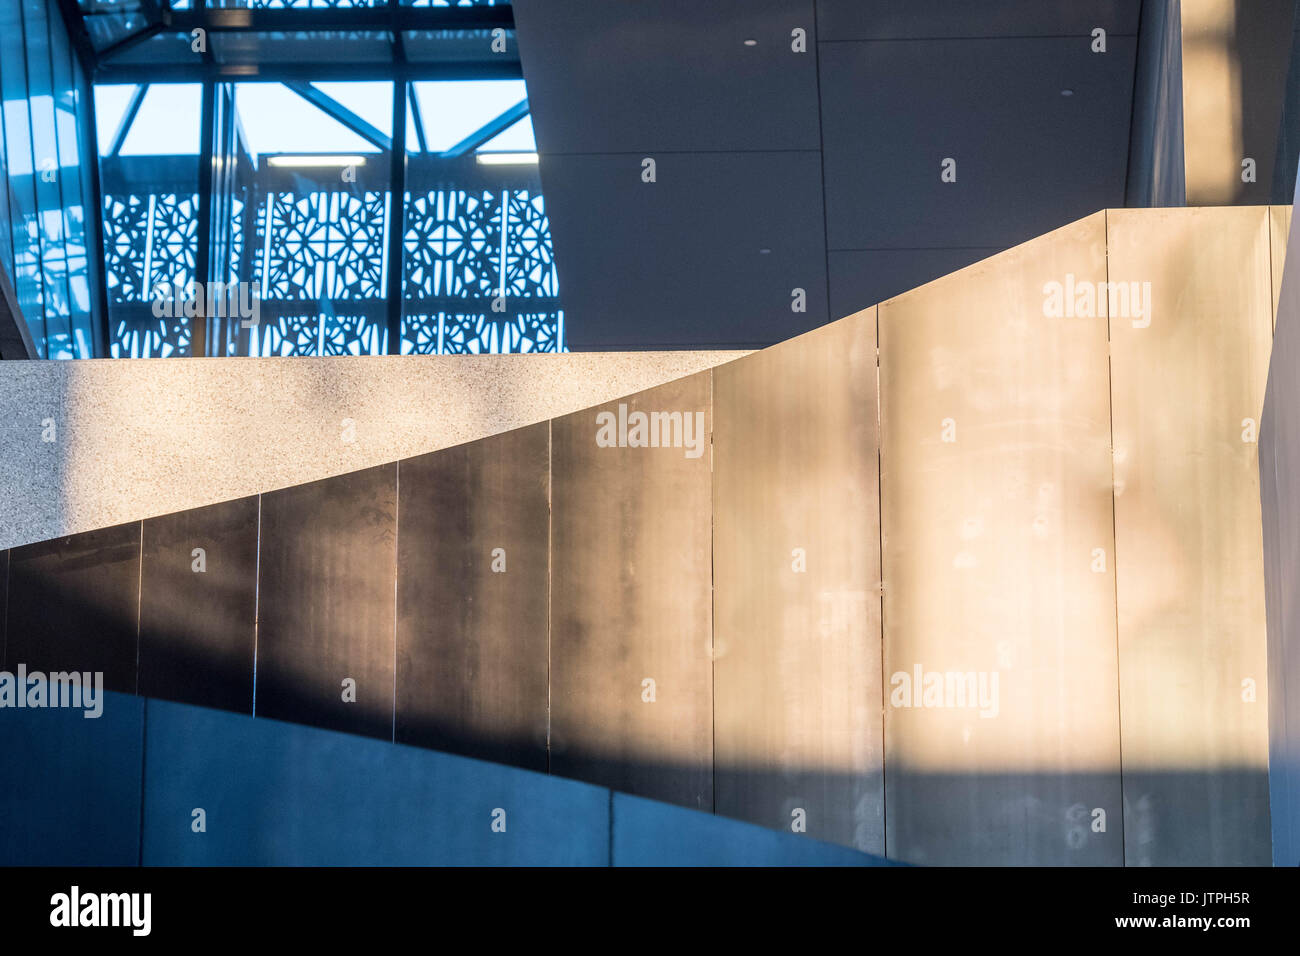 National Museum of African American History and Culture, Washington D.C. Stock Photo